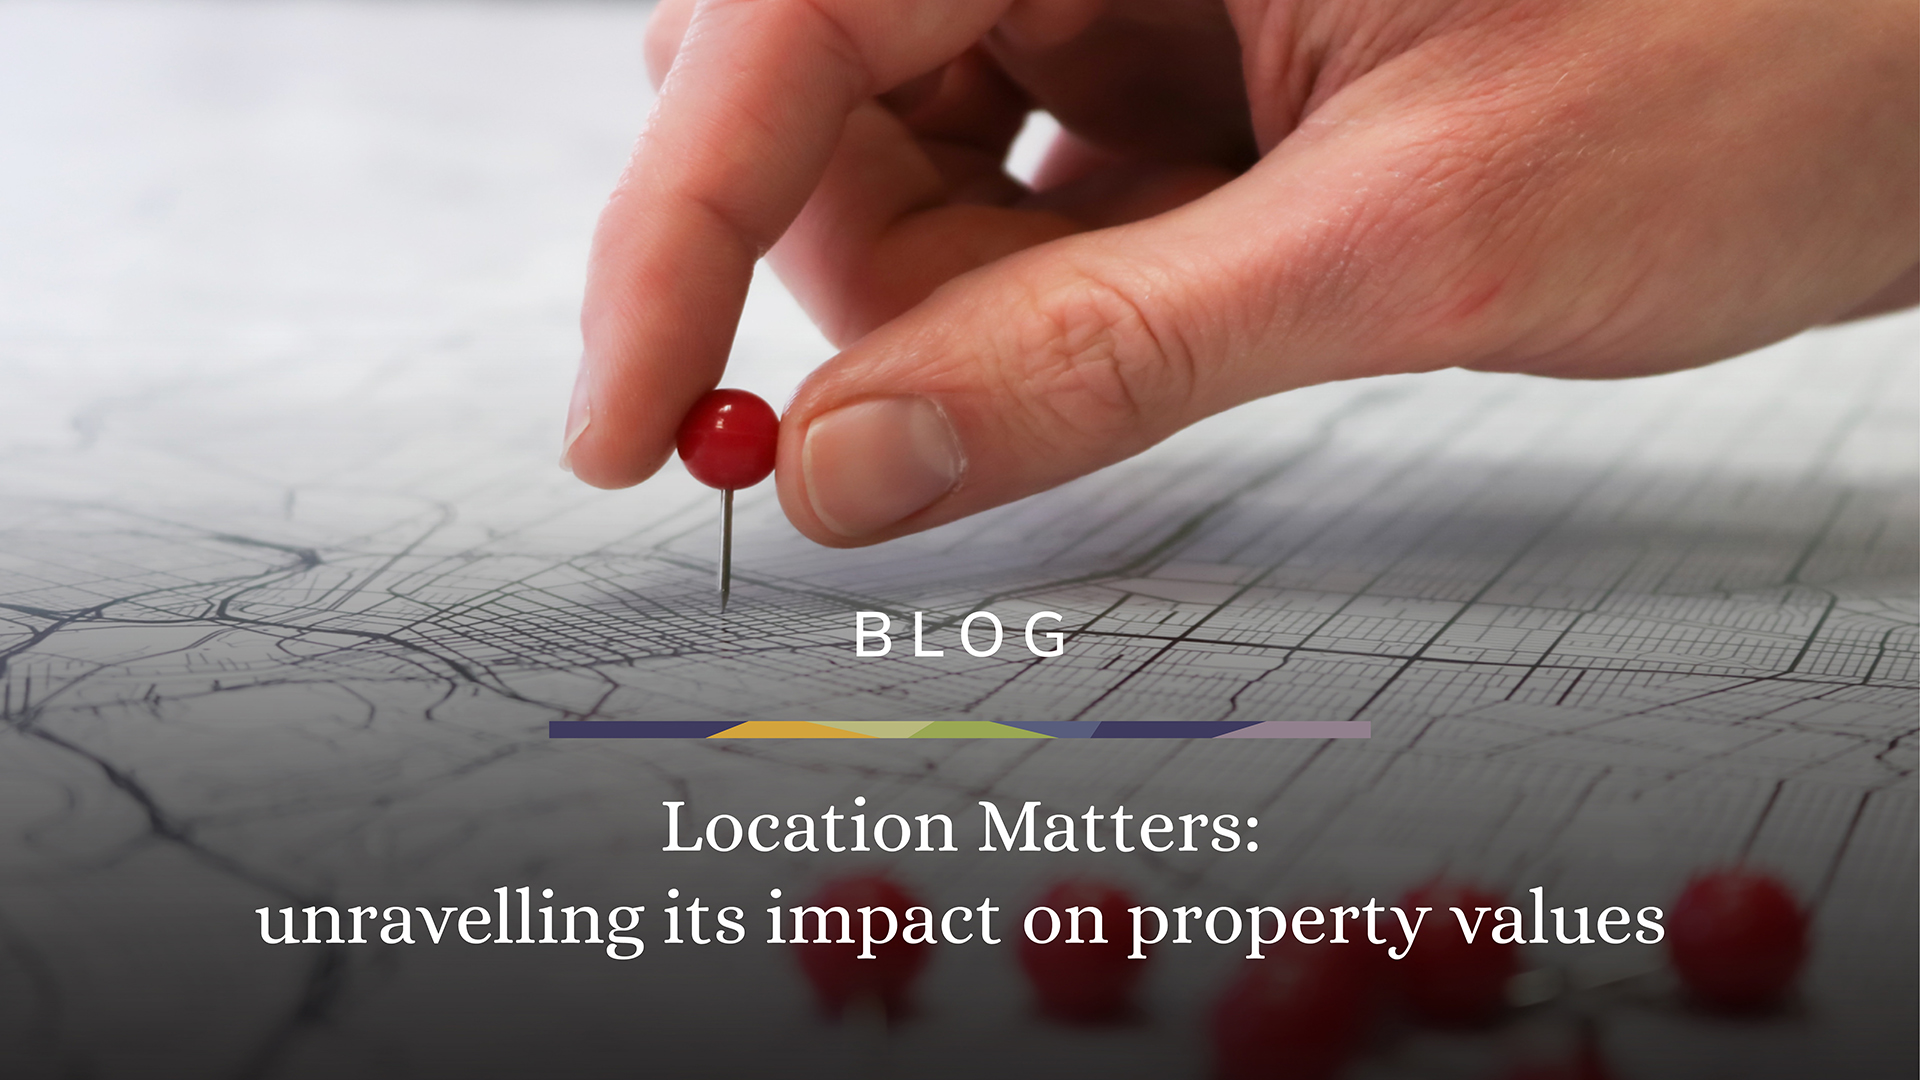 Location Matters: Unravelling its impact on property values